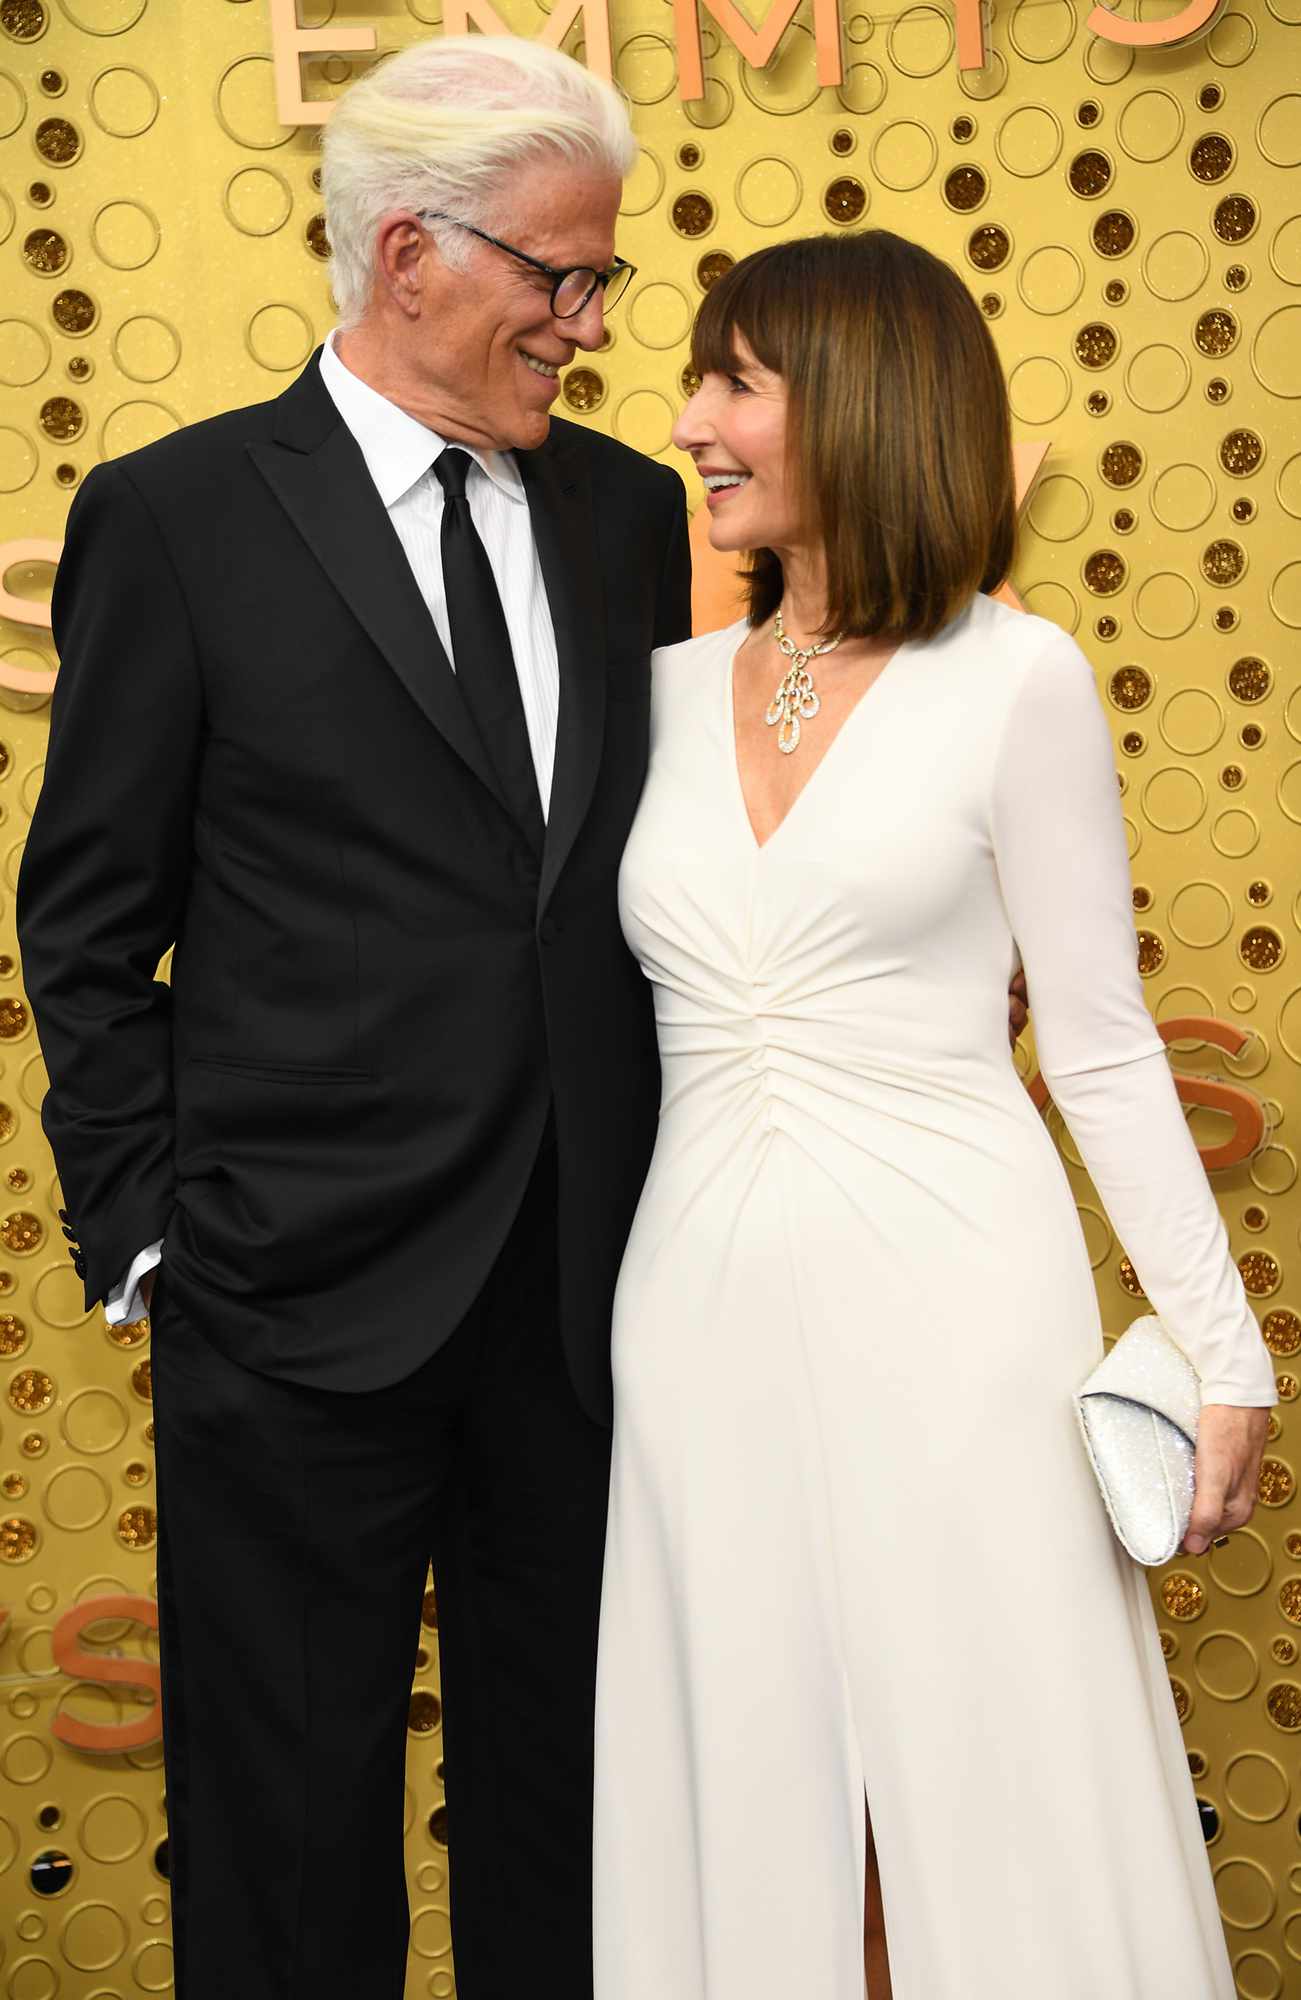 Ted Danson (L) and Mary Steenburgen attend the 71st Emmy Awards at Microsoft Theater on September 22, 2019 in Los Angeles, California